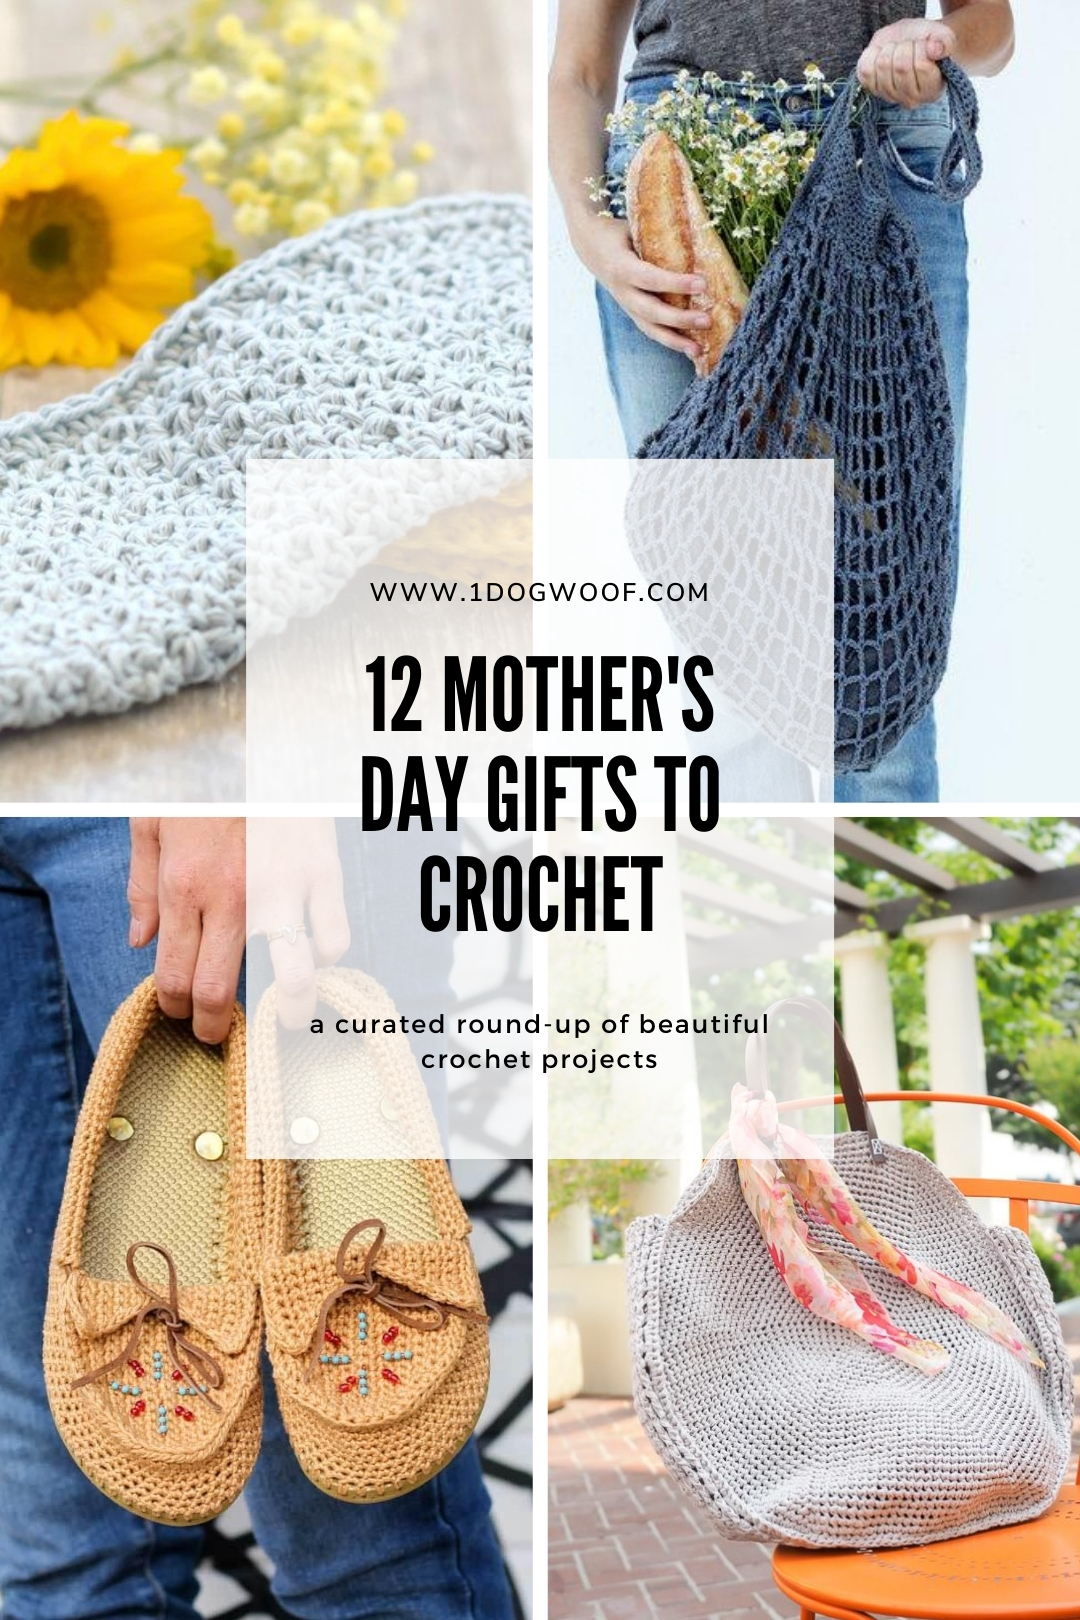 12 Mother's Day Crochet Gifts I'd Like to Get